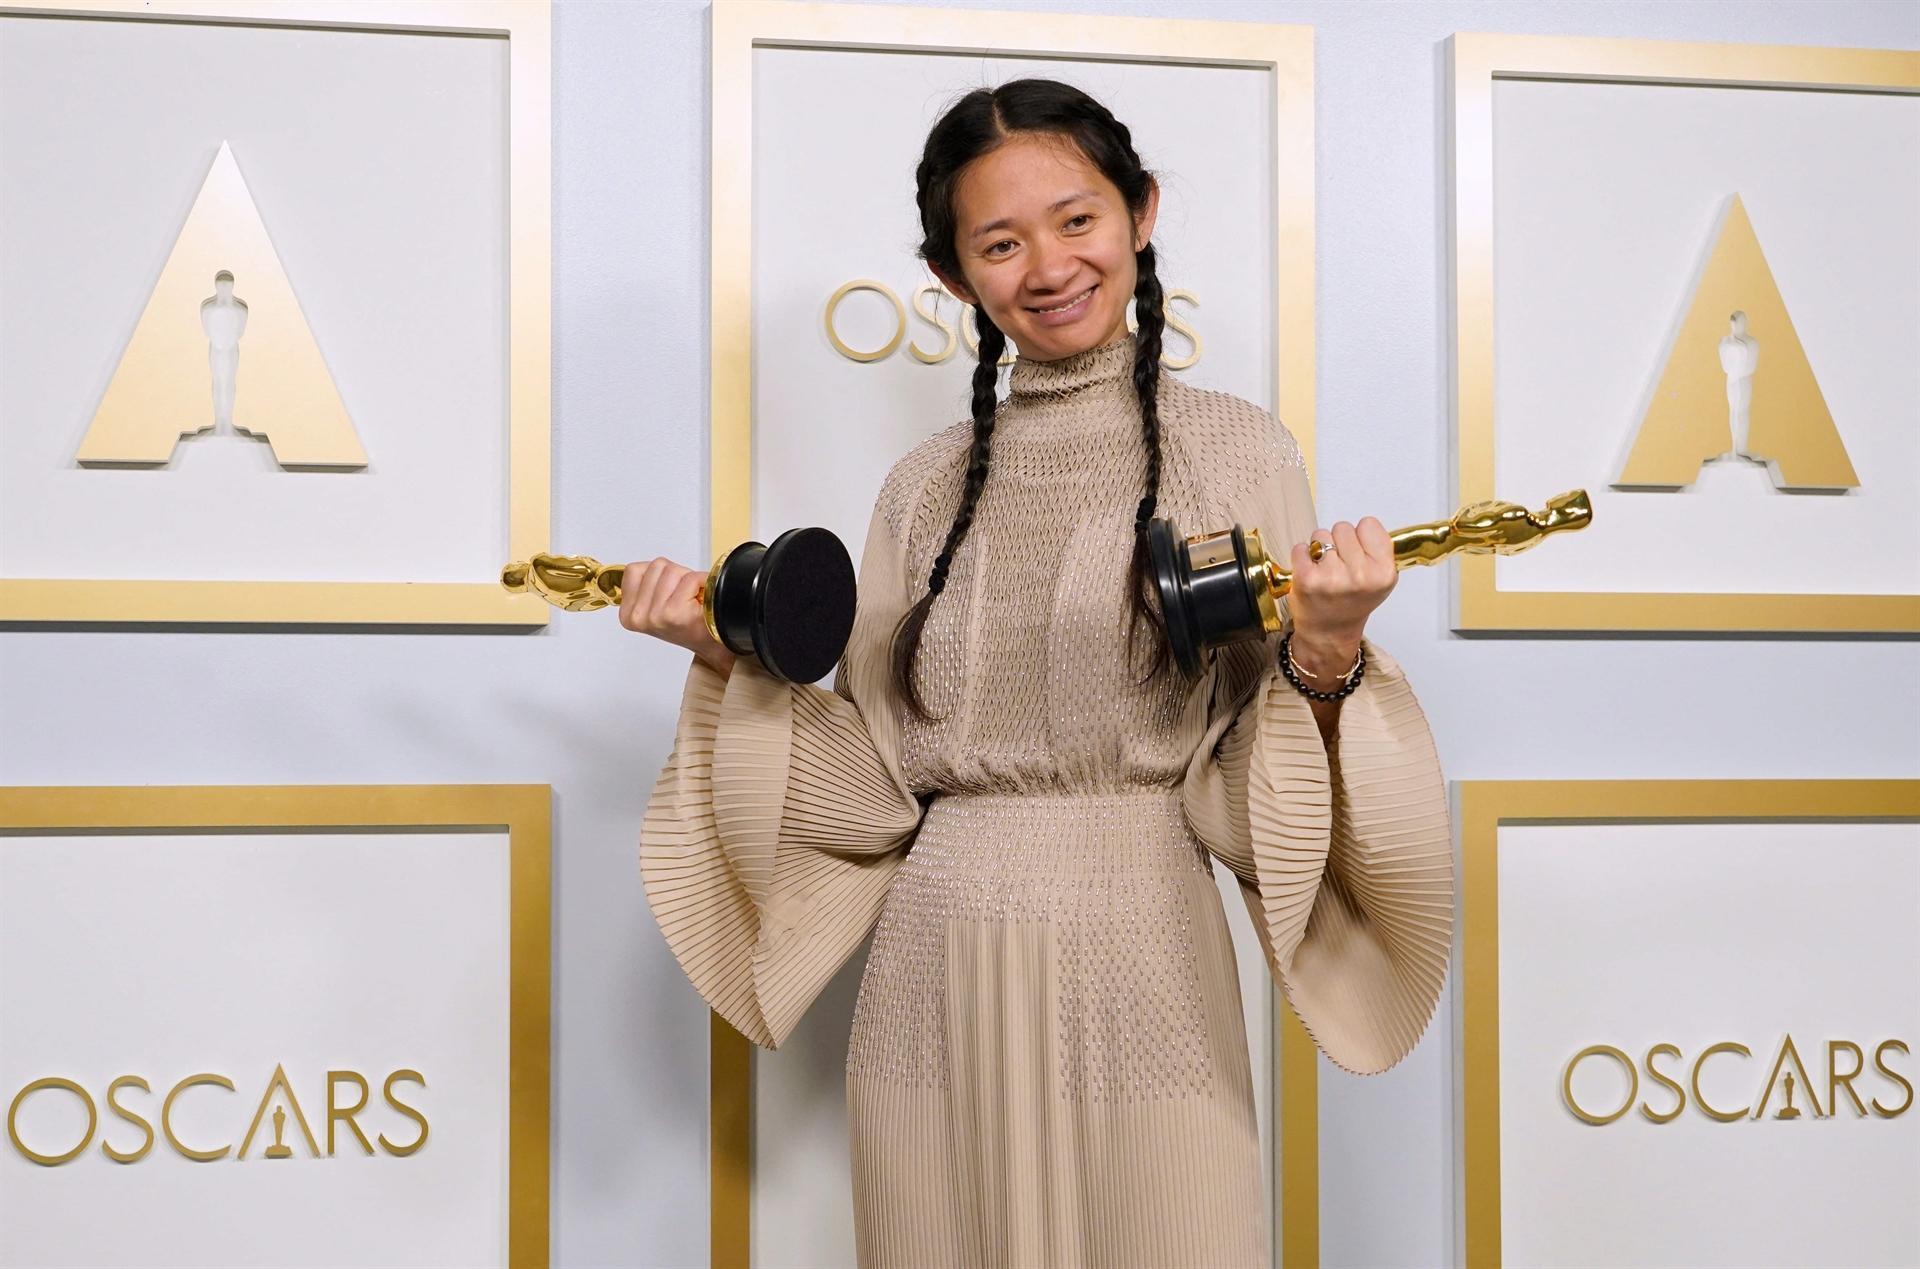 Oscar Winners 2021: Here's Who Won From 'Nomadland' and Frances